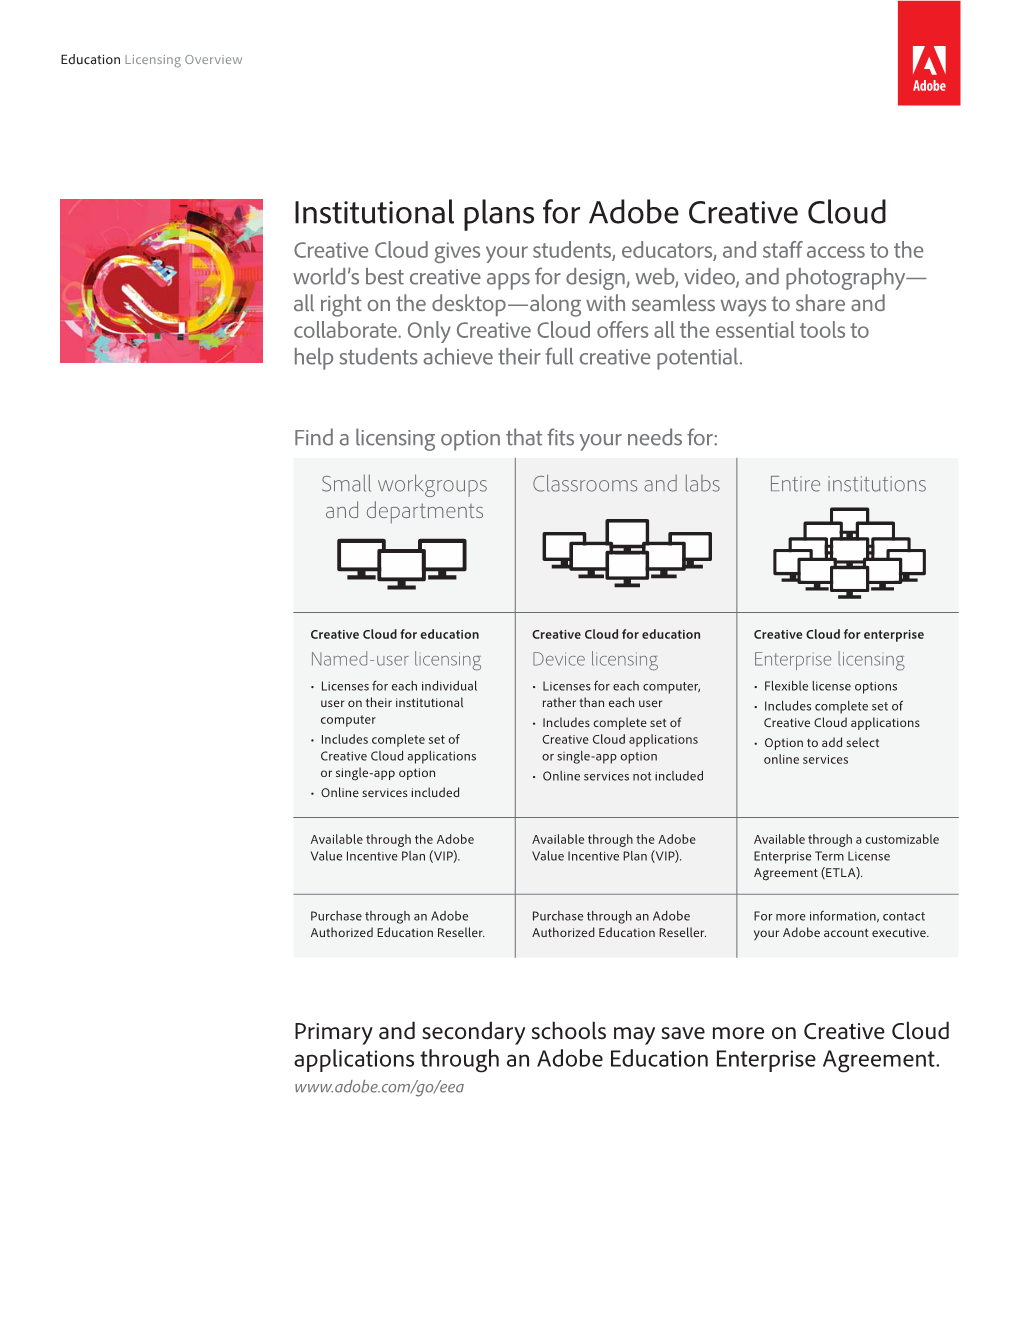 Institutional Plans for Adobe Creative Cloud